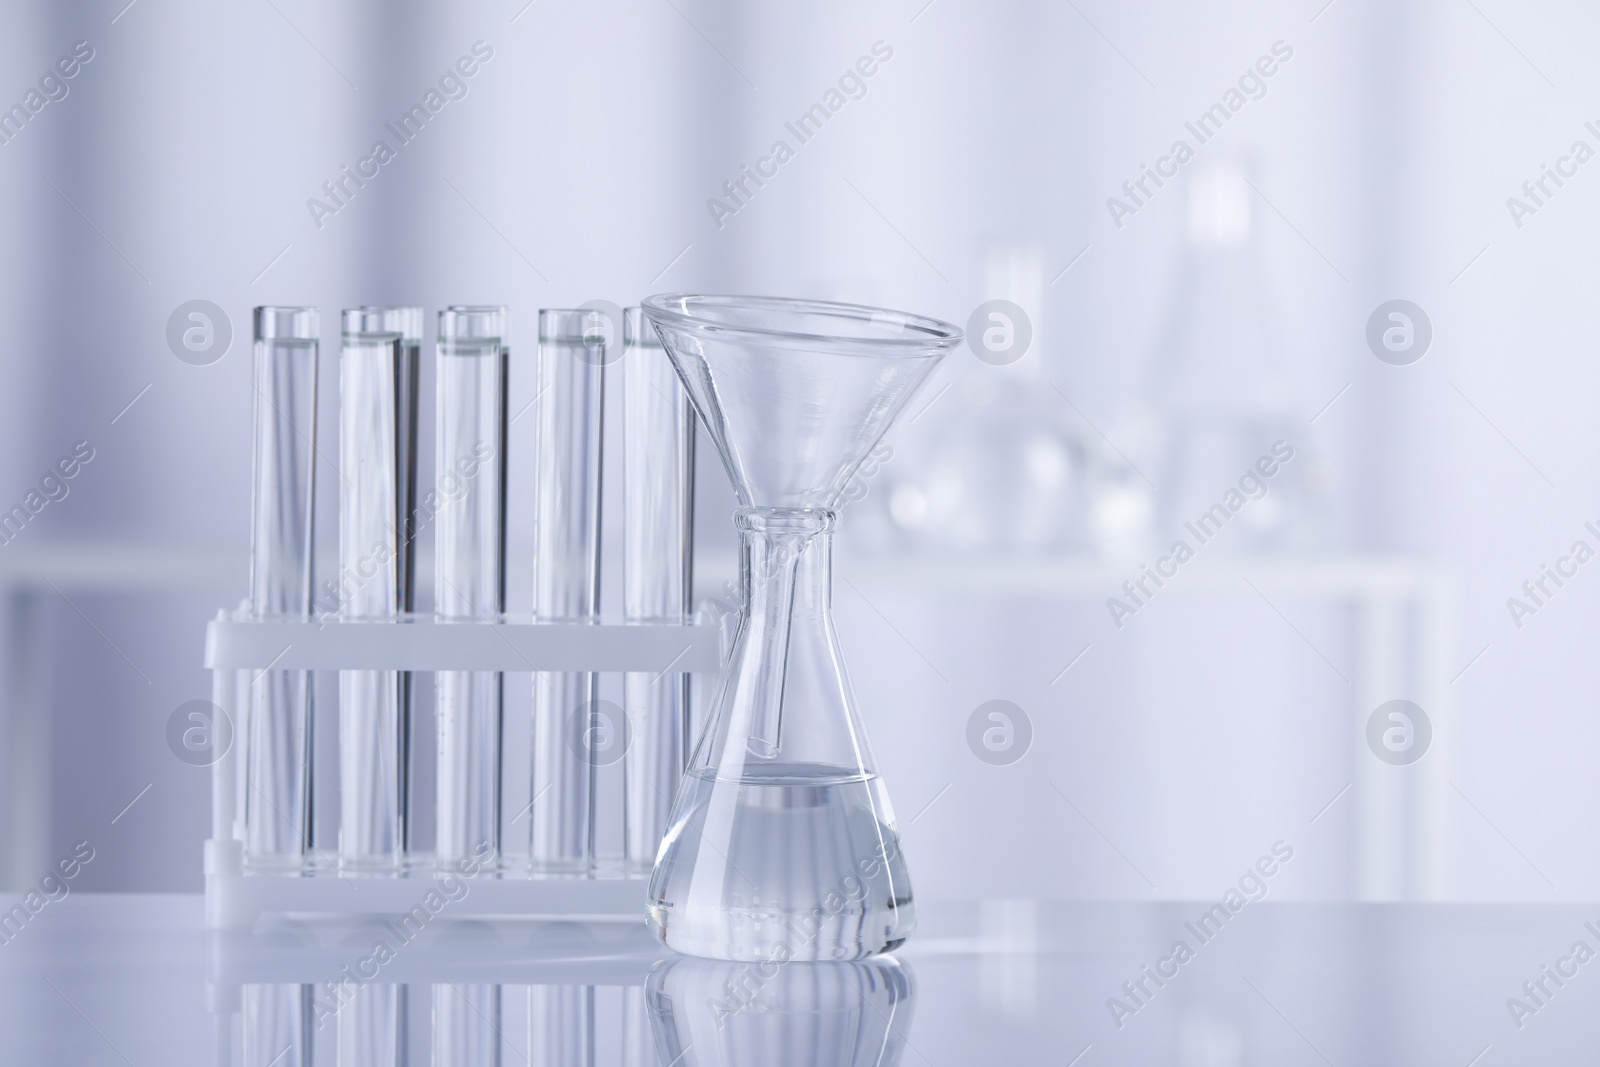 Photo of Different laboratory glassware with transparent liquid on table against blurred background. Space for text